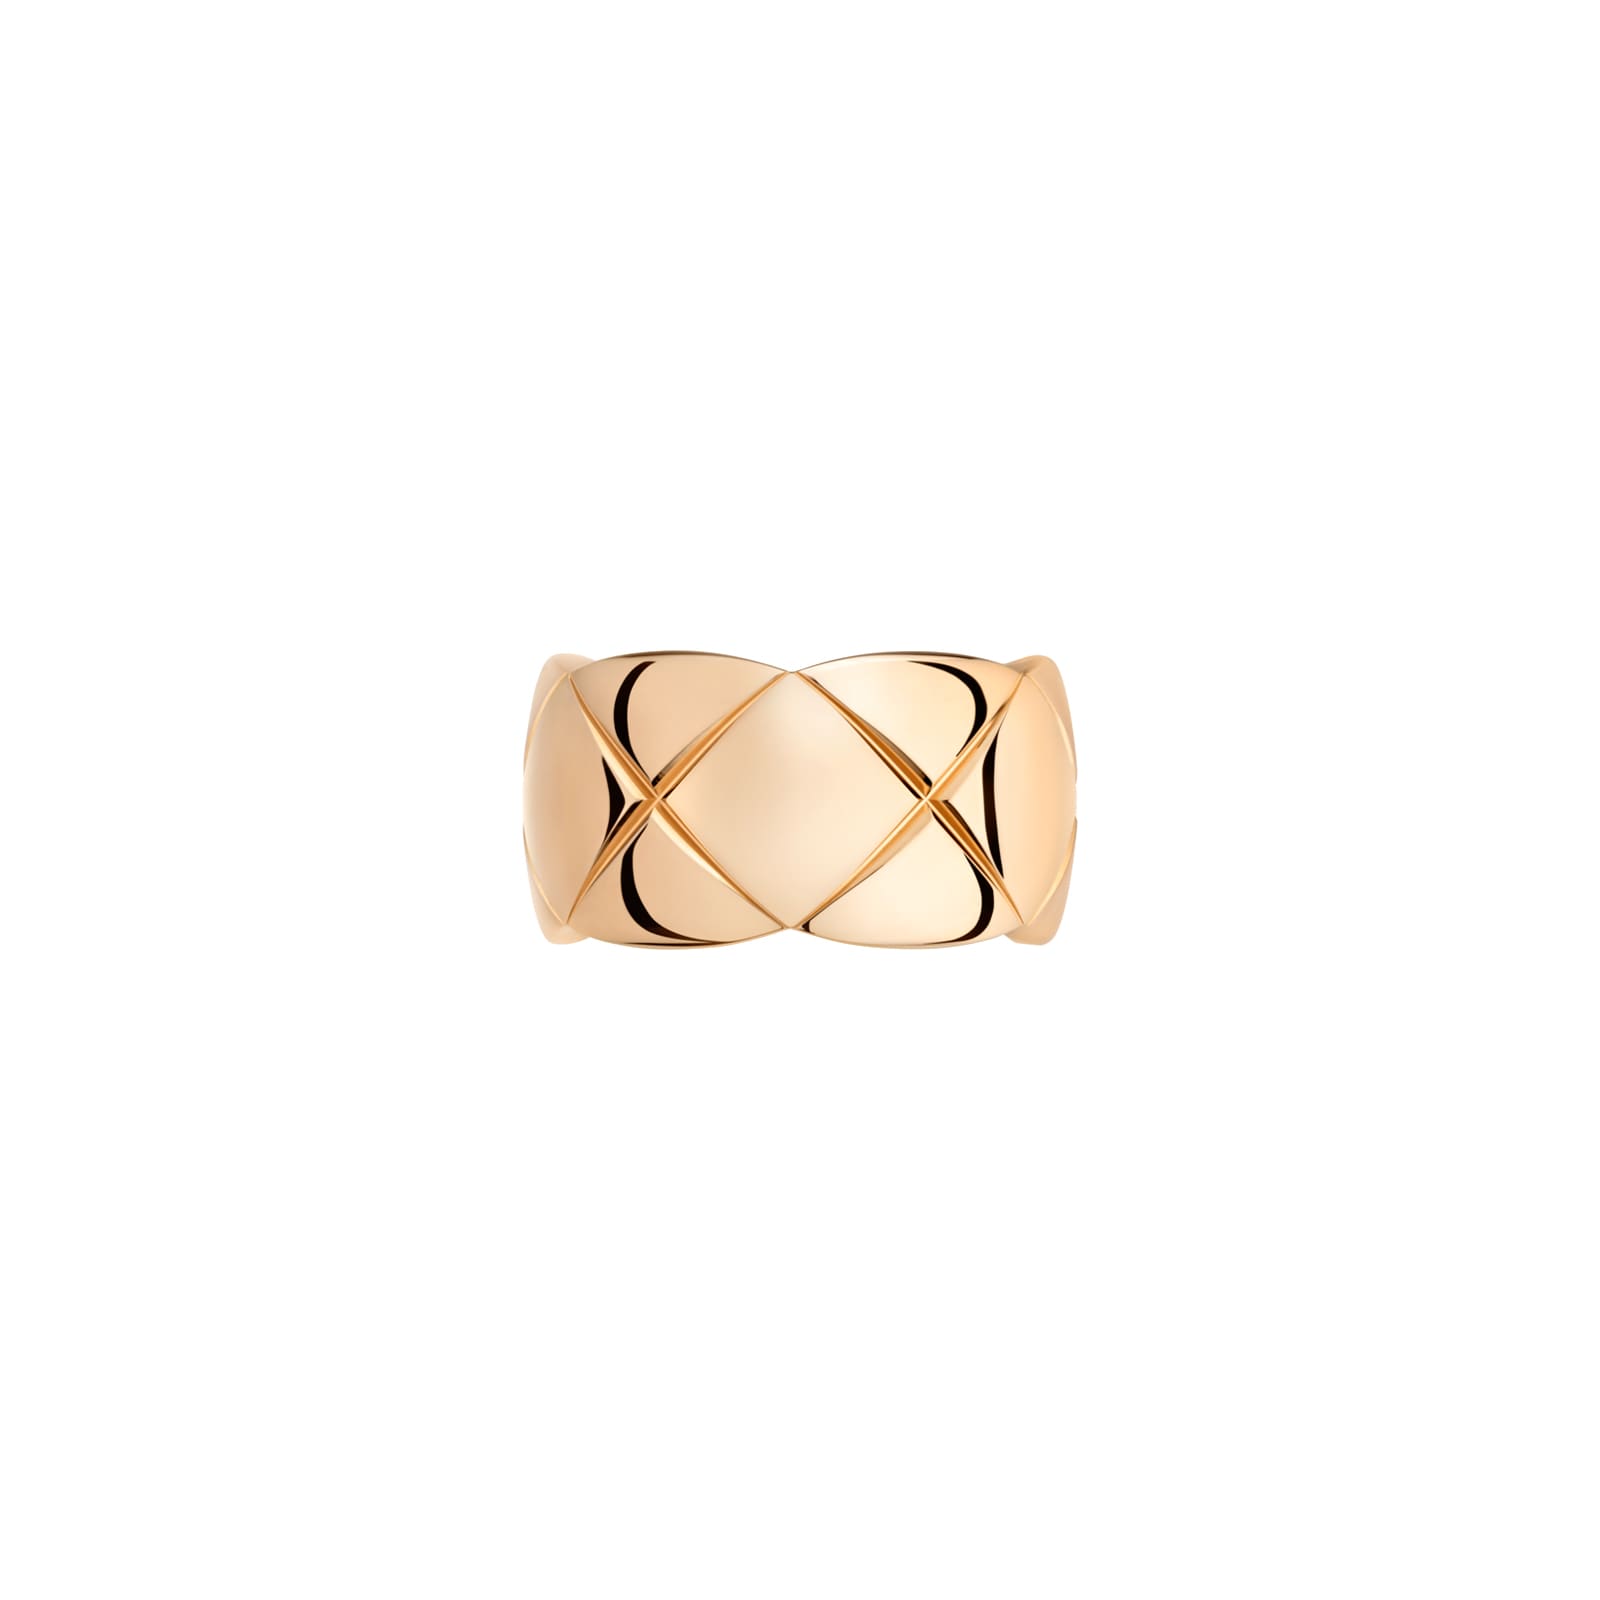 Chanel Jewelry 18k Beige Gold Coco Crush Quilted Motif Single Huggie Earring  J12155